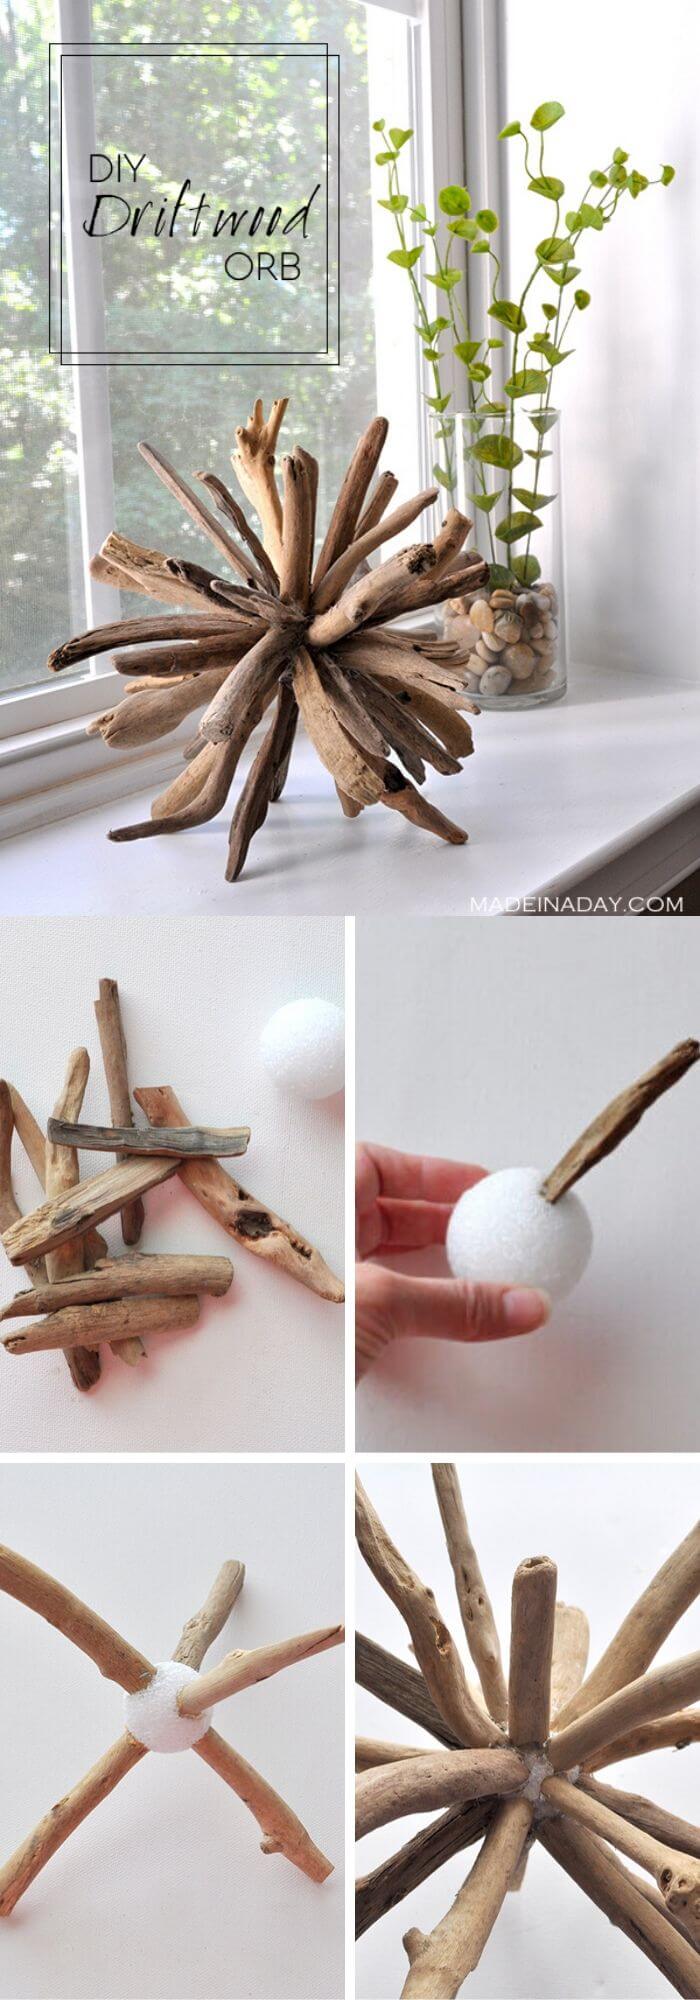 20 driftwood craft projects